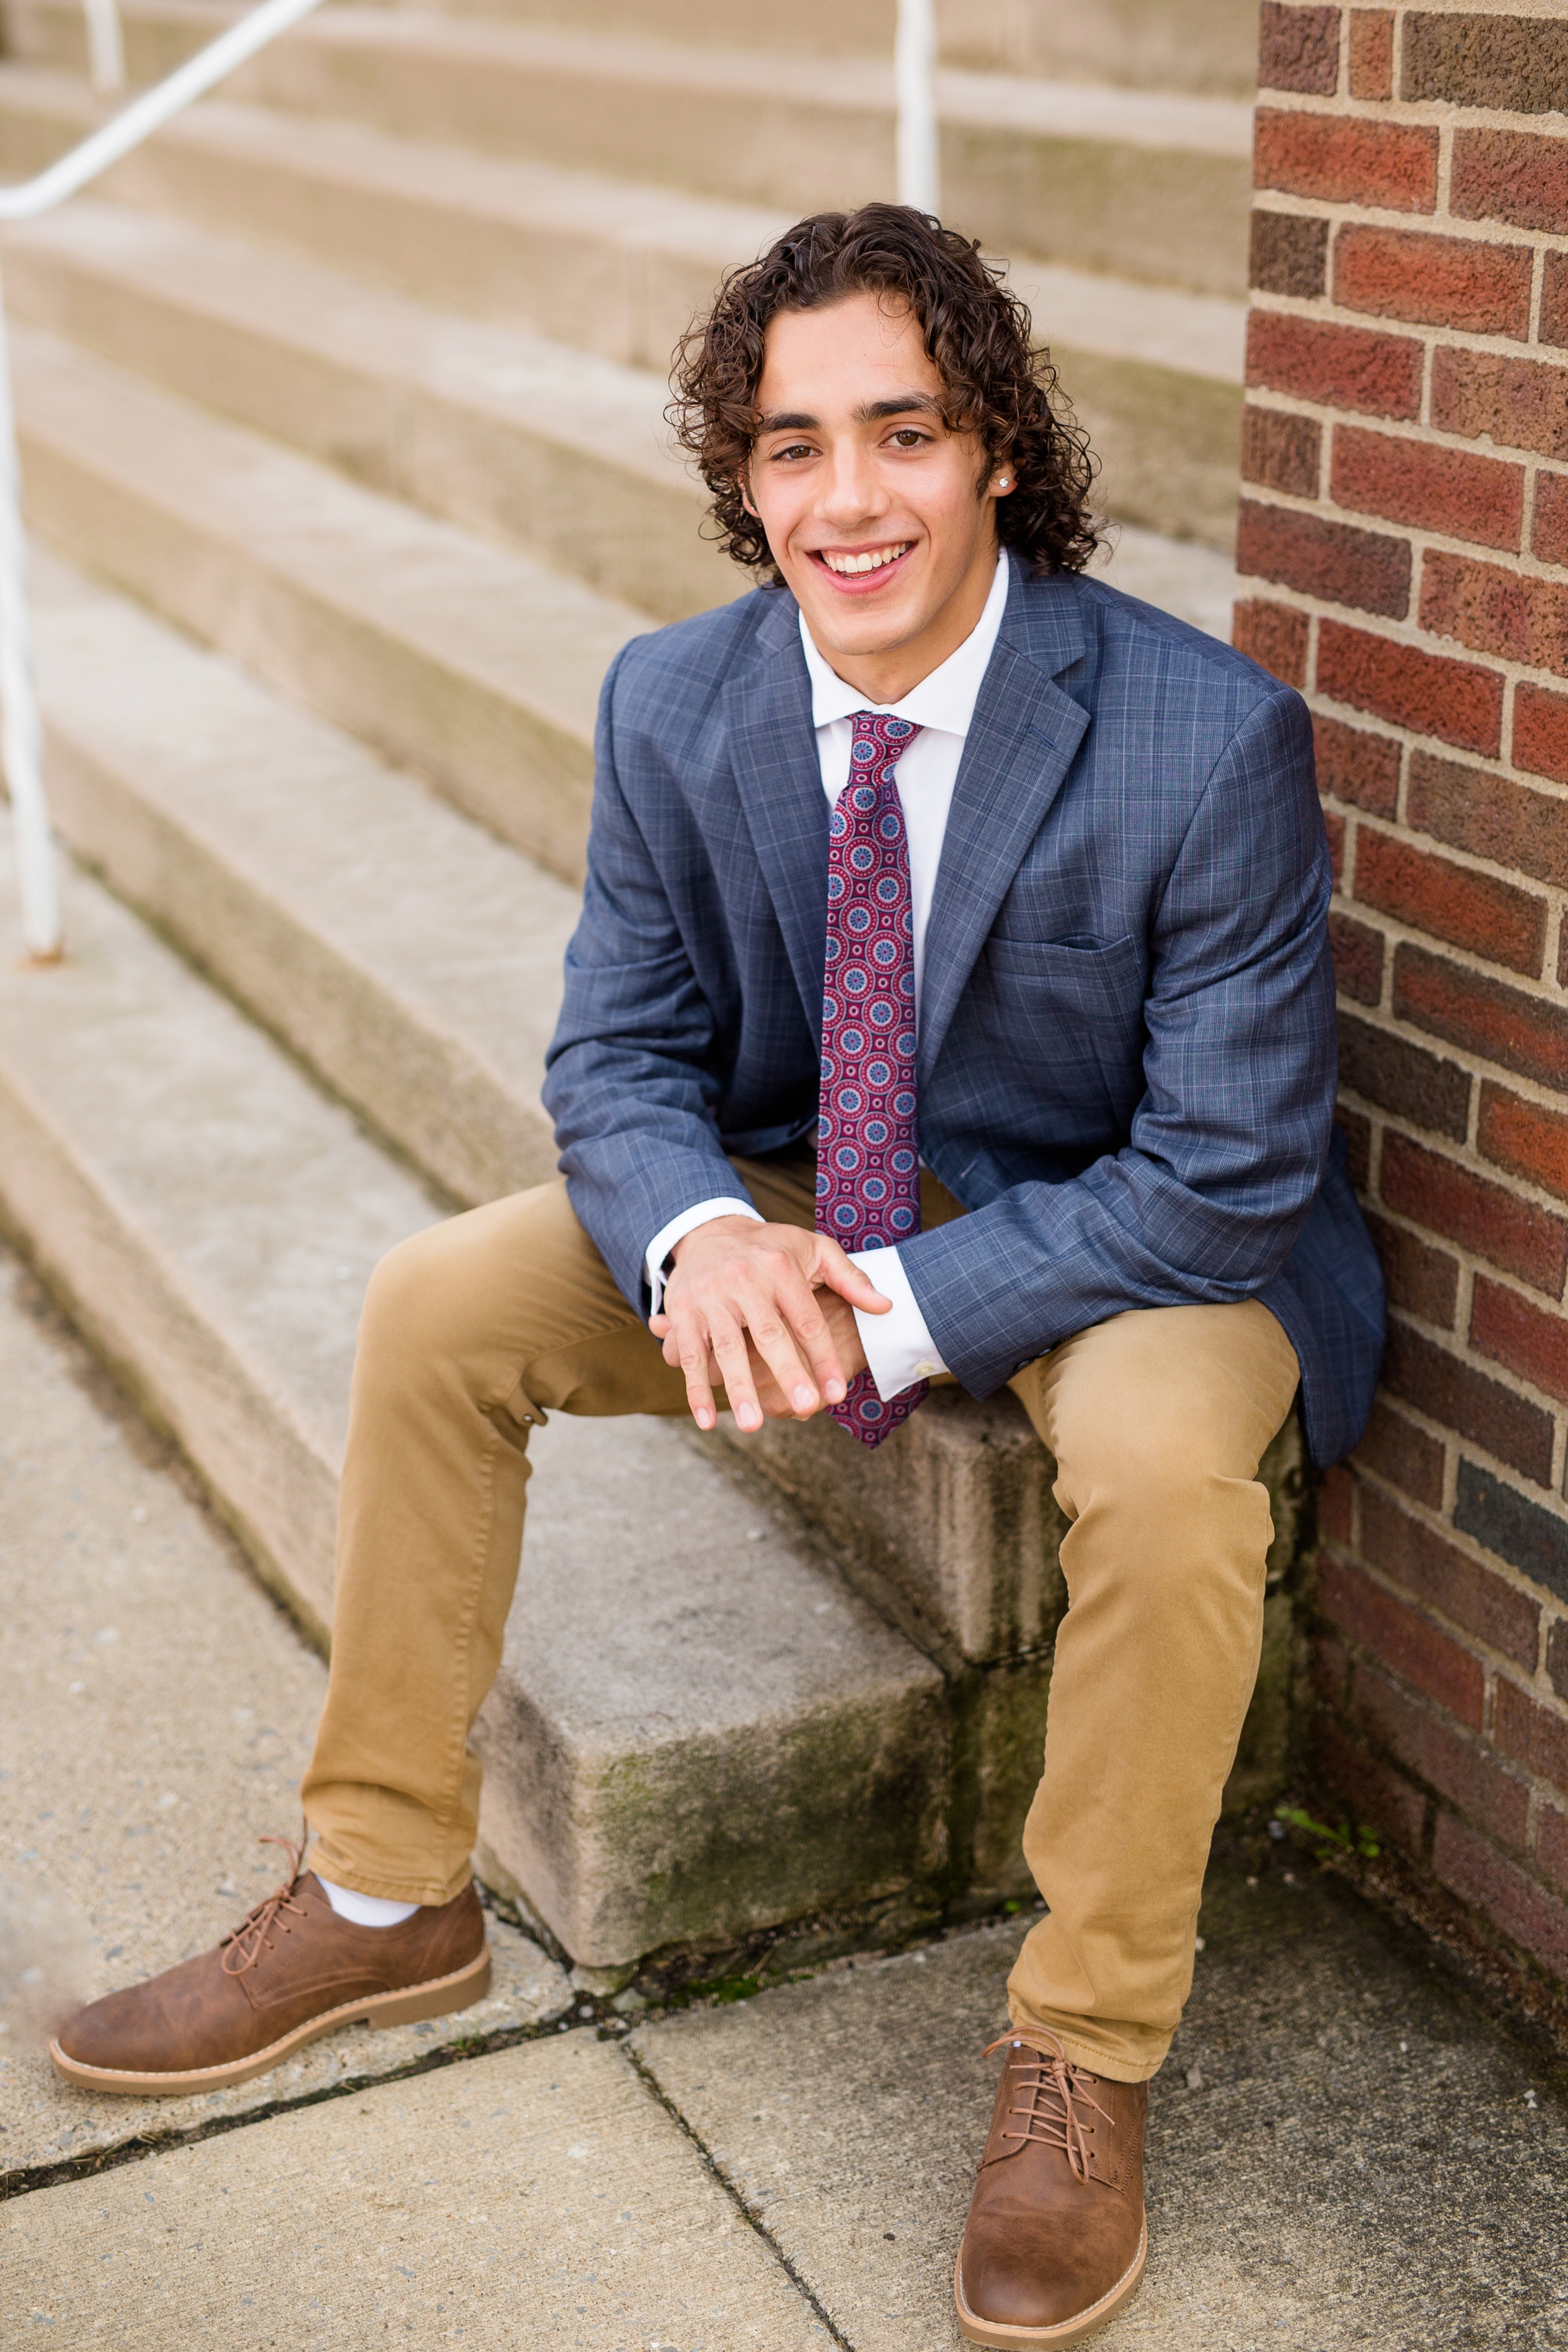 historic harmony senior photos, best places for senior photos in pittsburgh, best locations for senior photos in pittsburgh, pittsburgh senior photographer, cranberry township senior photographer